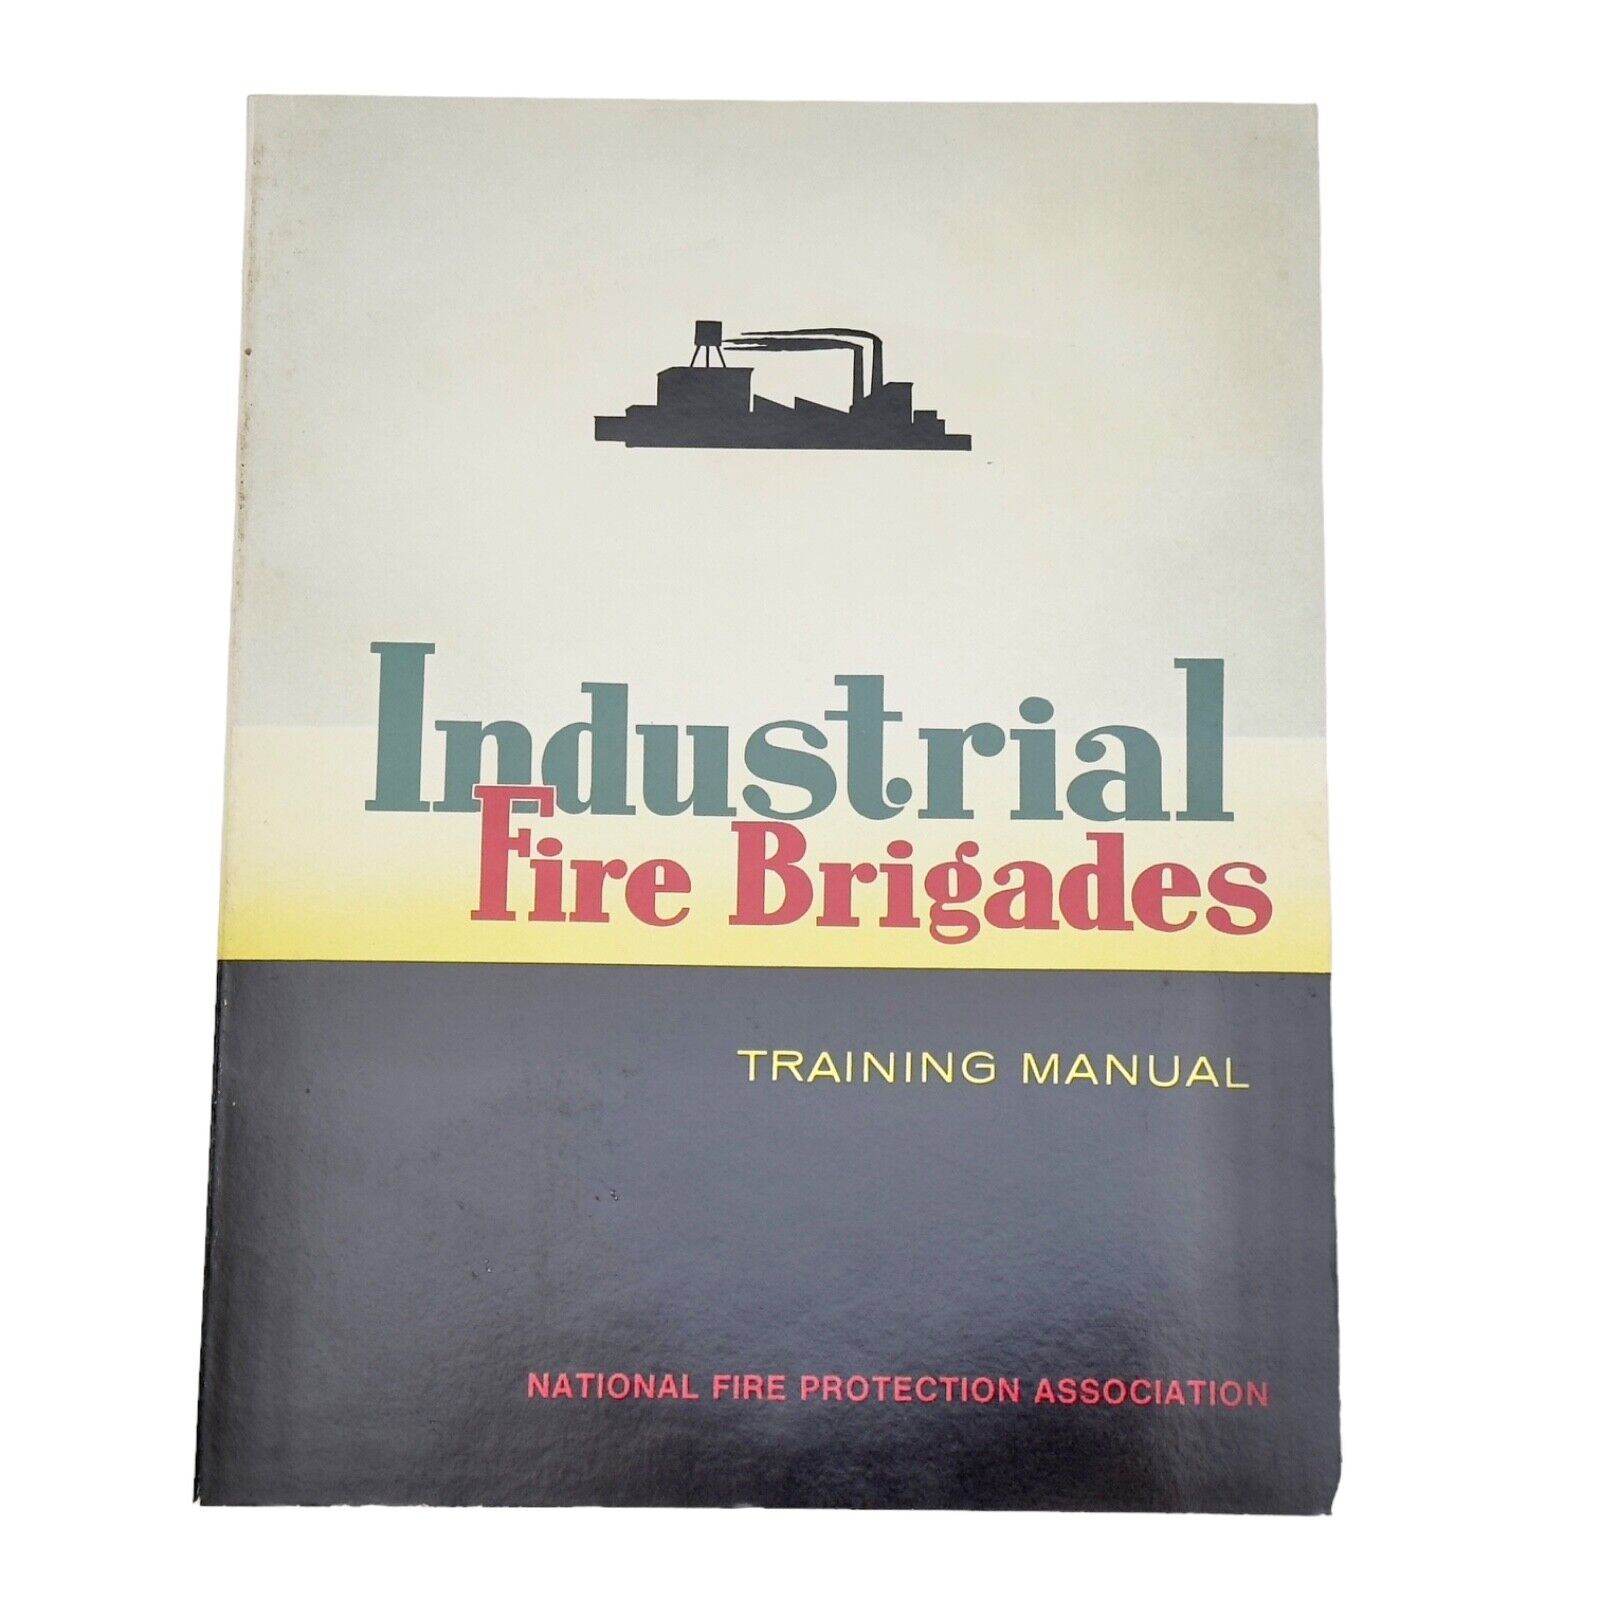 Vintage Fire Fighting Industrial Fire Brigades Training Manual 1974 NFPA